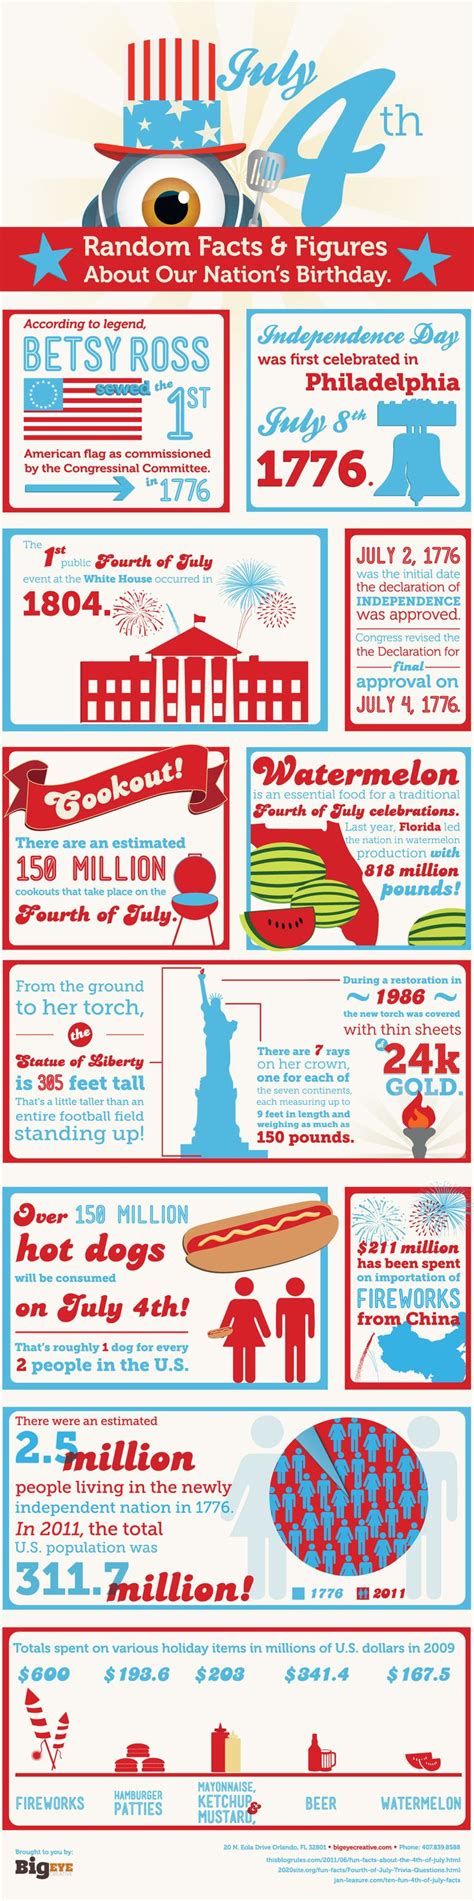 4th of july trivia questions and answers. Pin by BIGEYE on INFOGRAPHICS | 4th of july trivia, Fourth of july, 4th of july